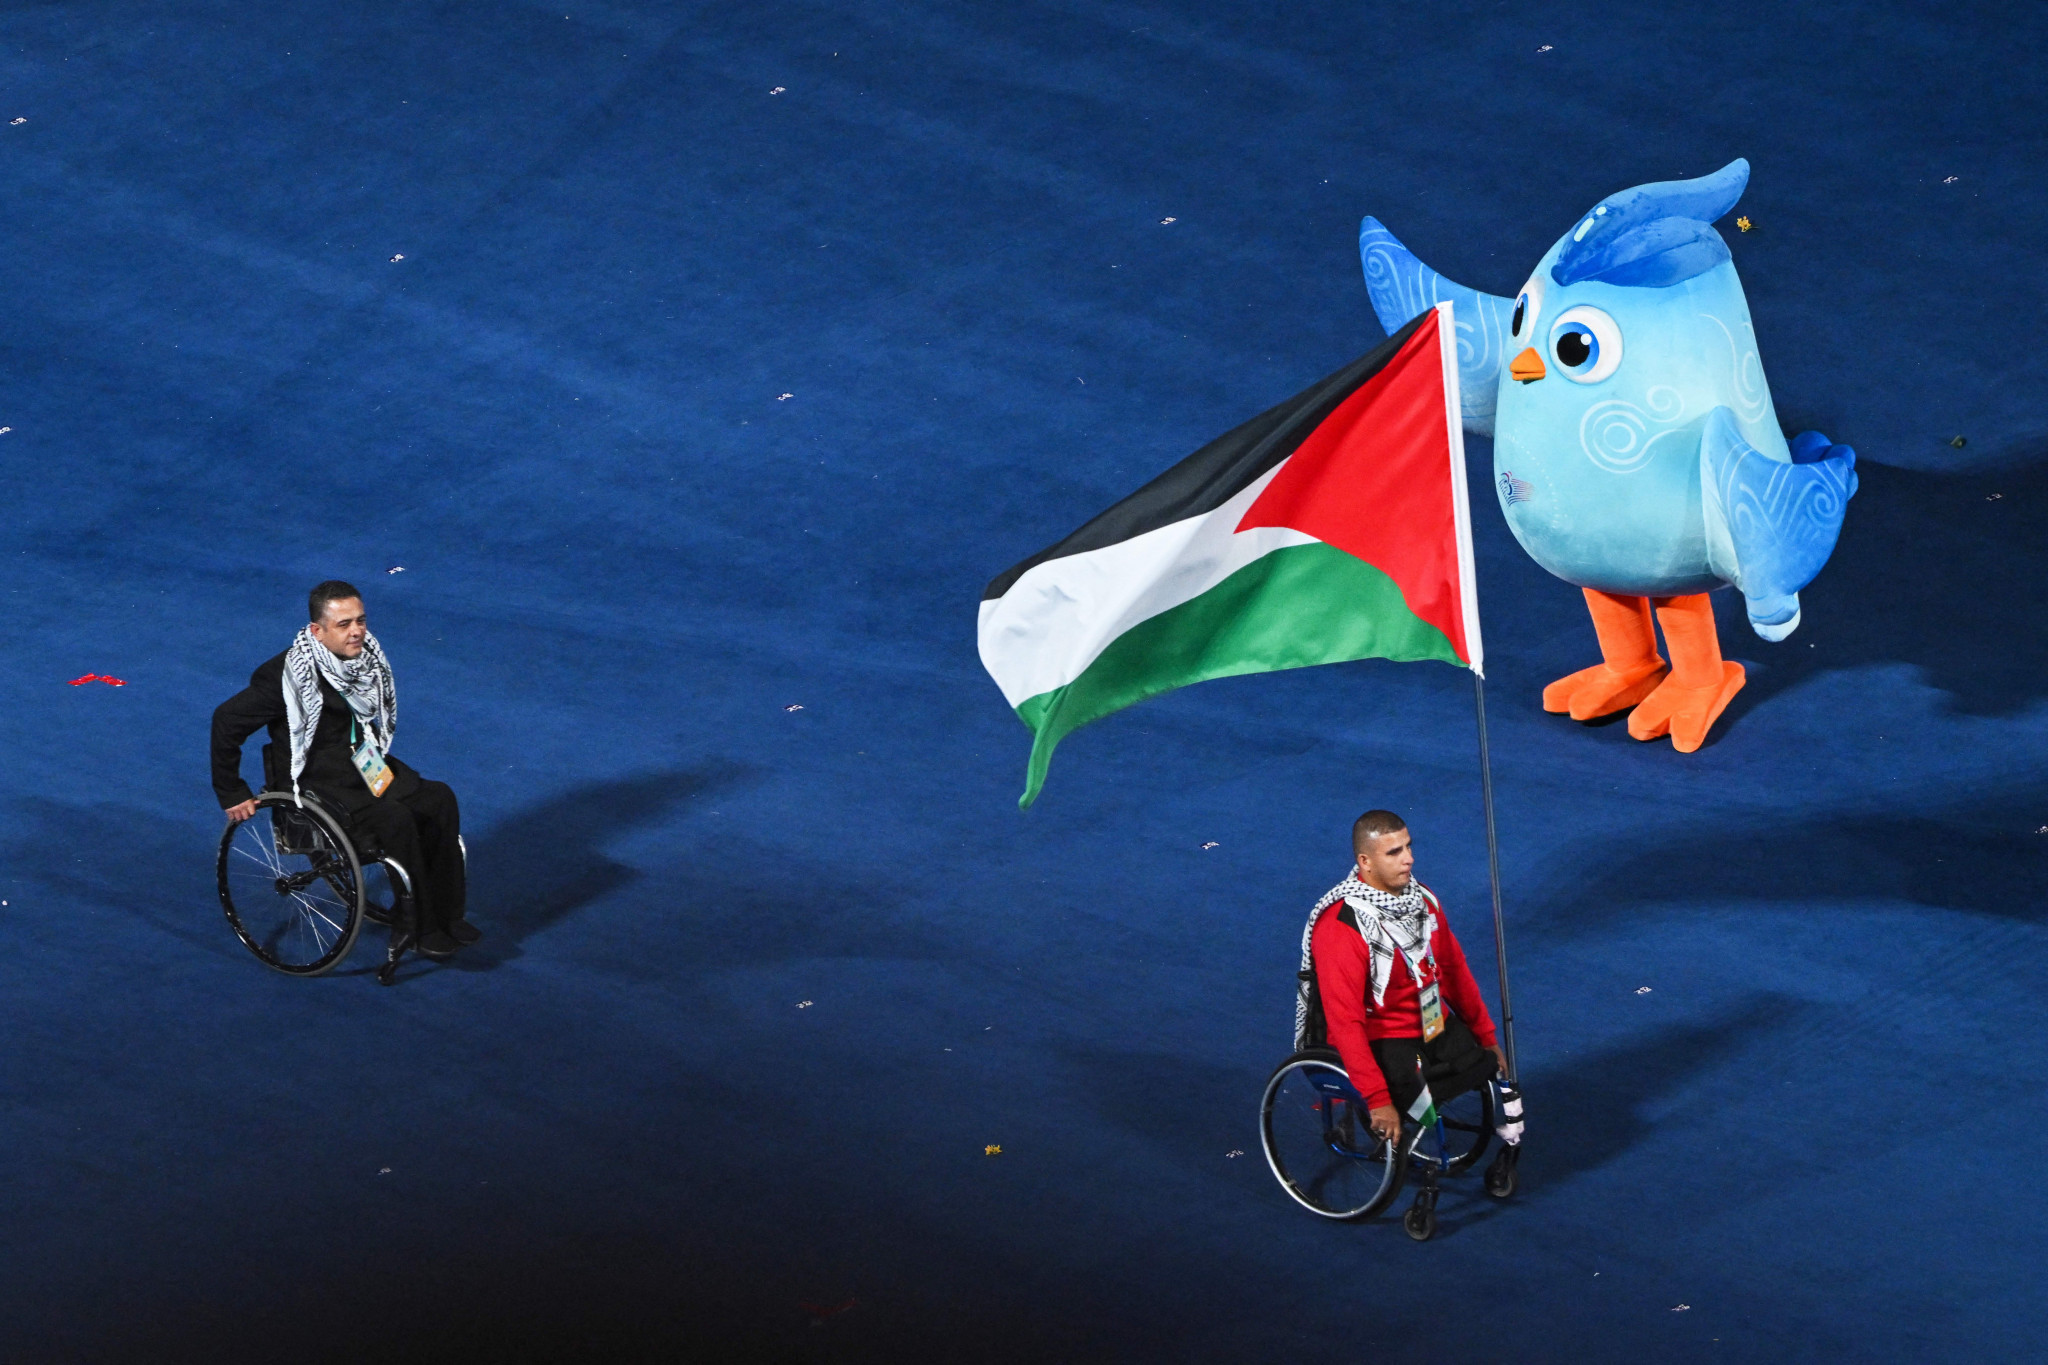 The Asian Para Games mascot mascot Fei Fei played a leading role in the Opening Ceremony, including welcoming the small delegation from Palestine ©Getty Images